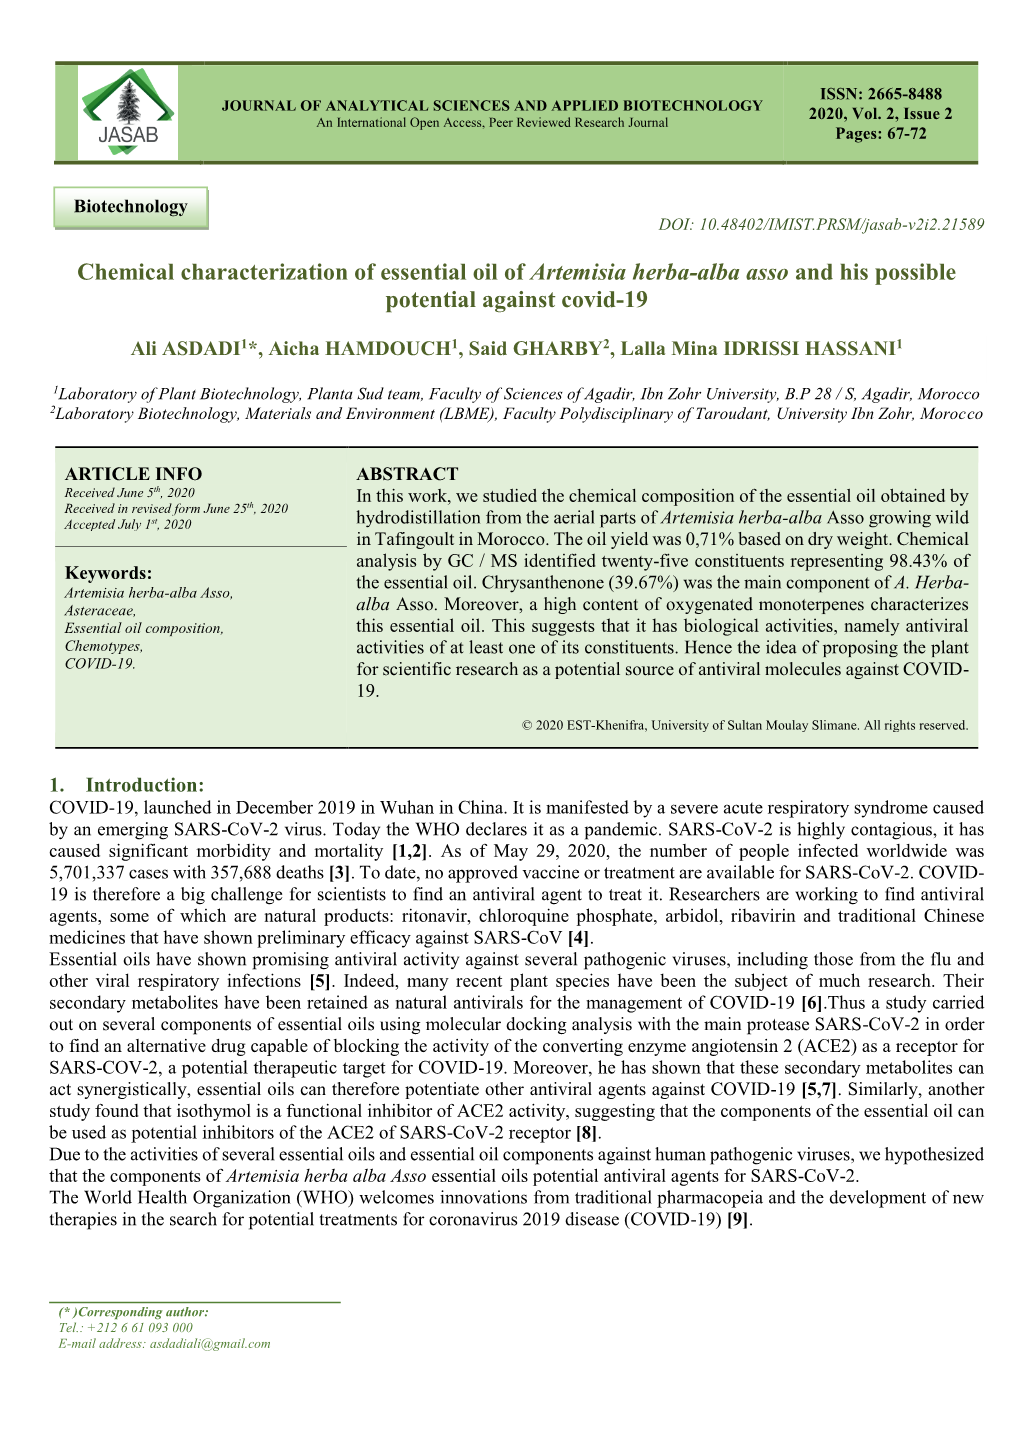 Chemical Characterization of Essential Oil of Artemisia Herba-Alba Asso and His Possible Potential Against Covid-19